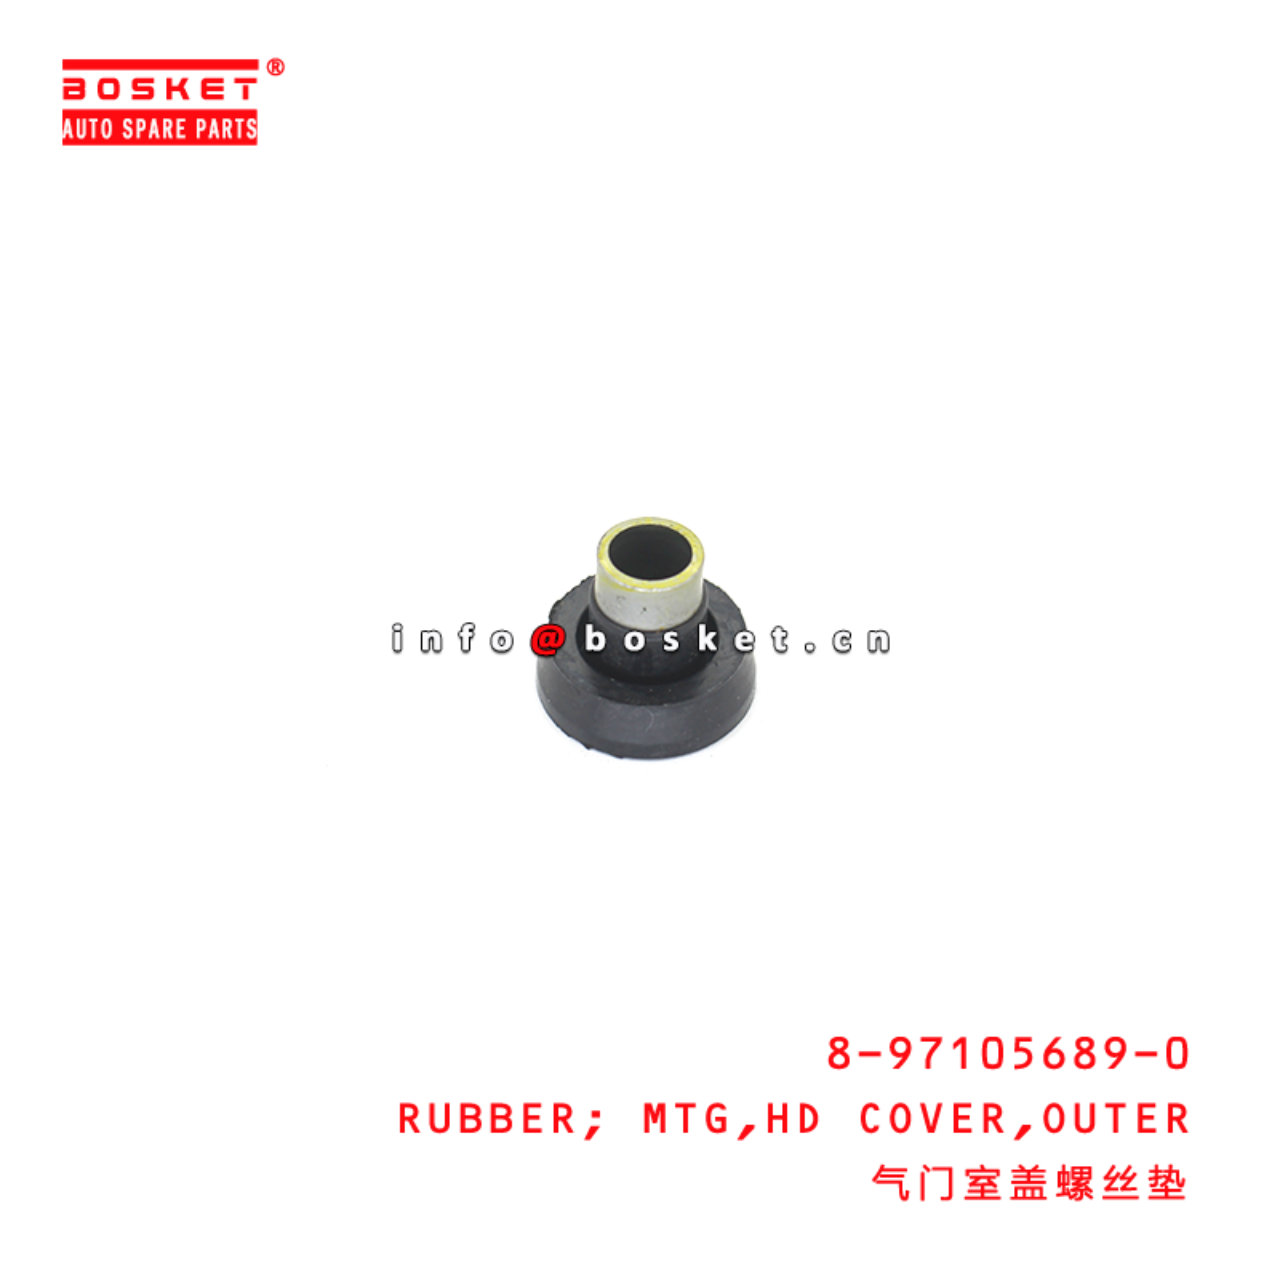 8-97105689-0 Outer Head Cover Mounting Rubber suitable for ISUZU NPR75 4HK1-T 8971056890